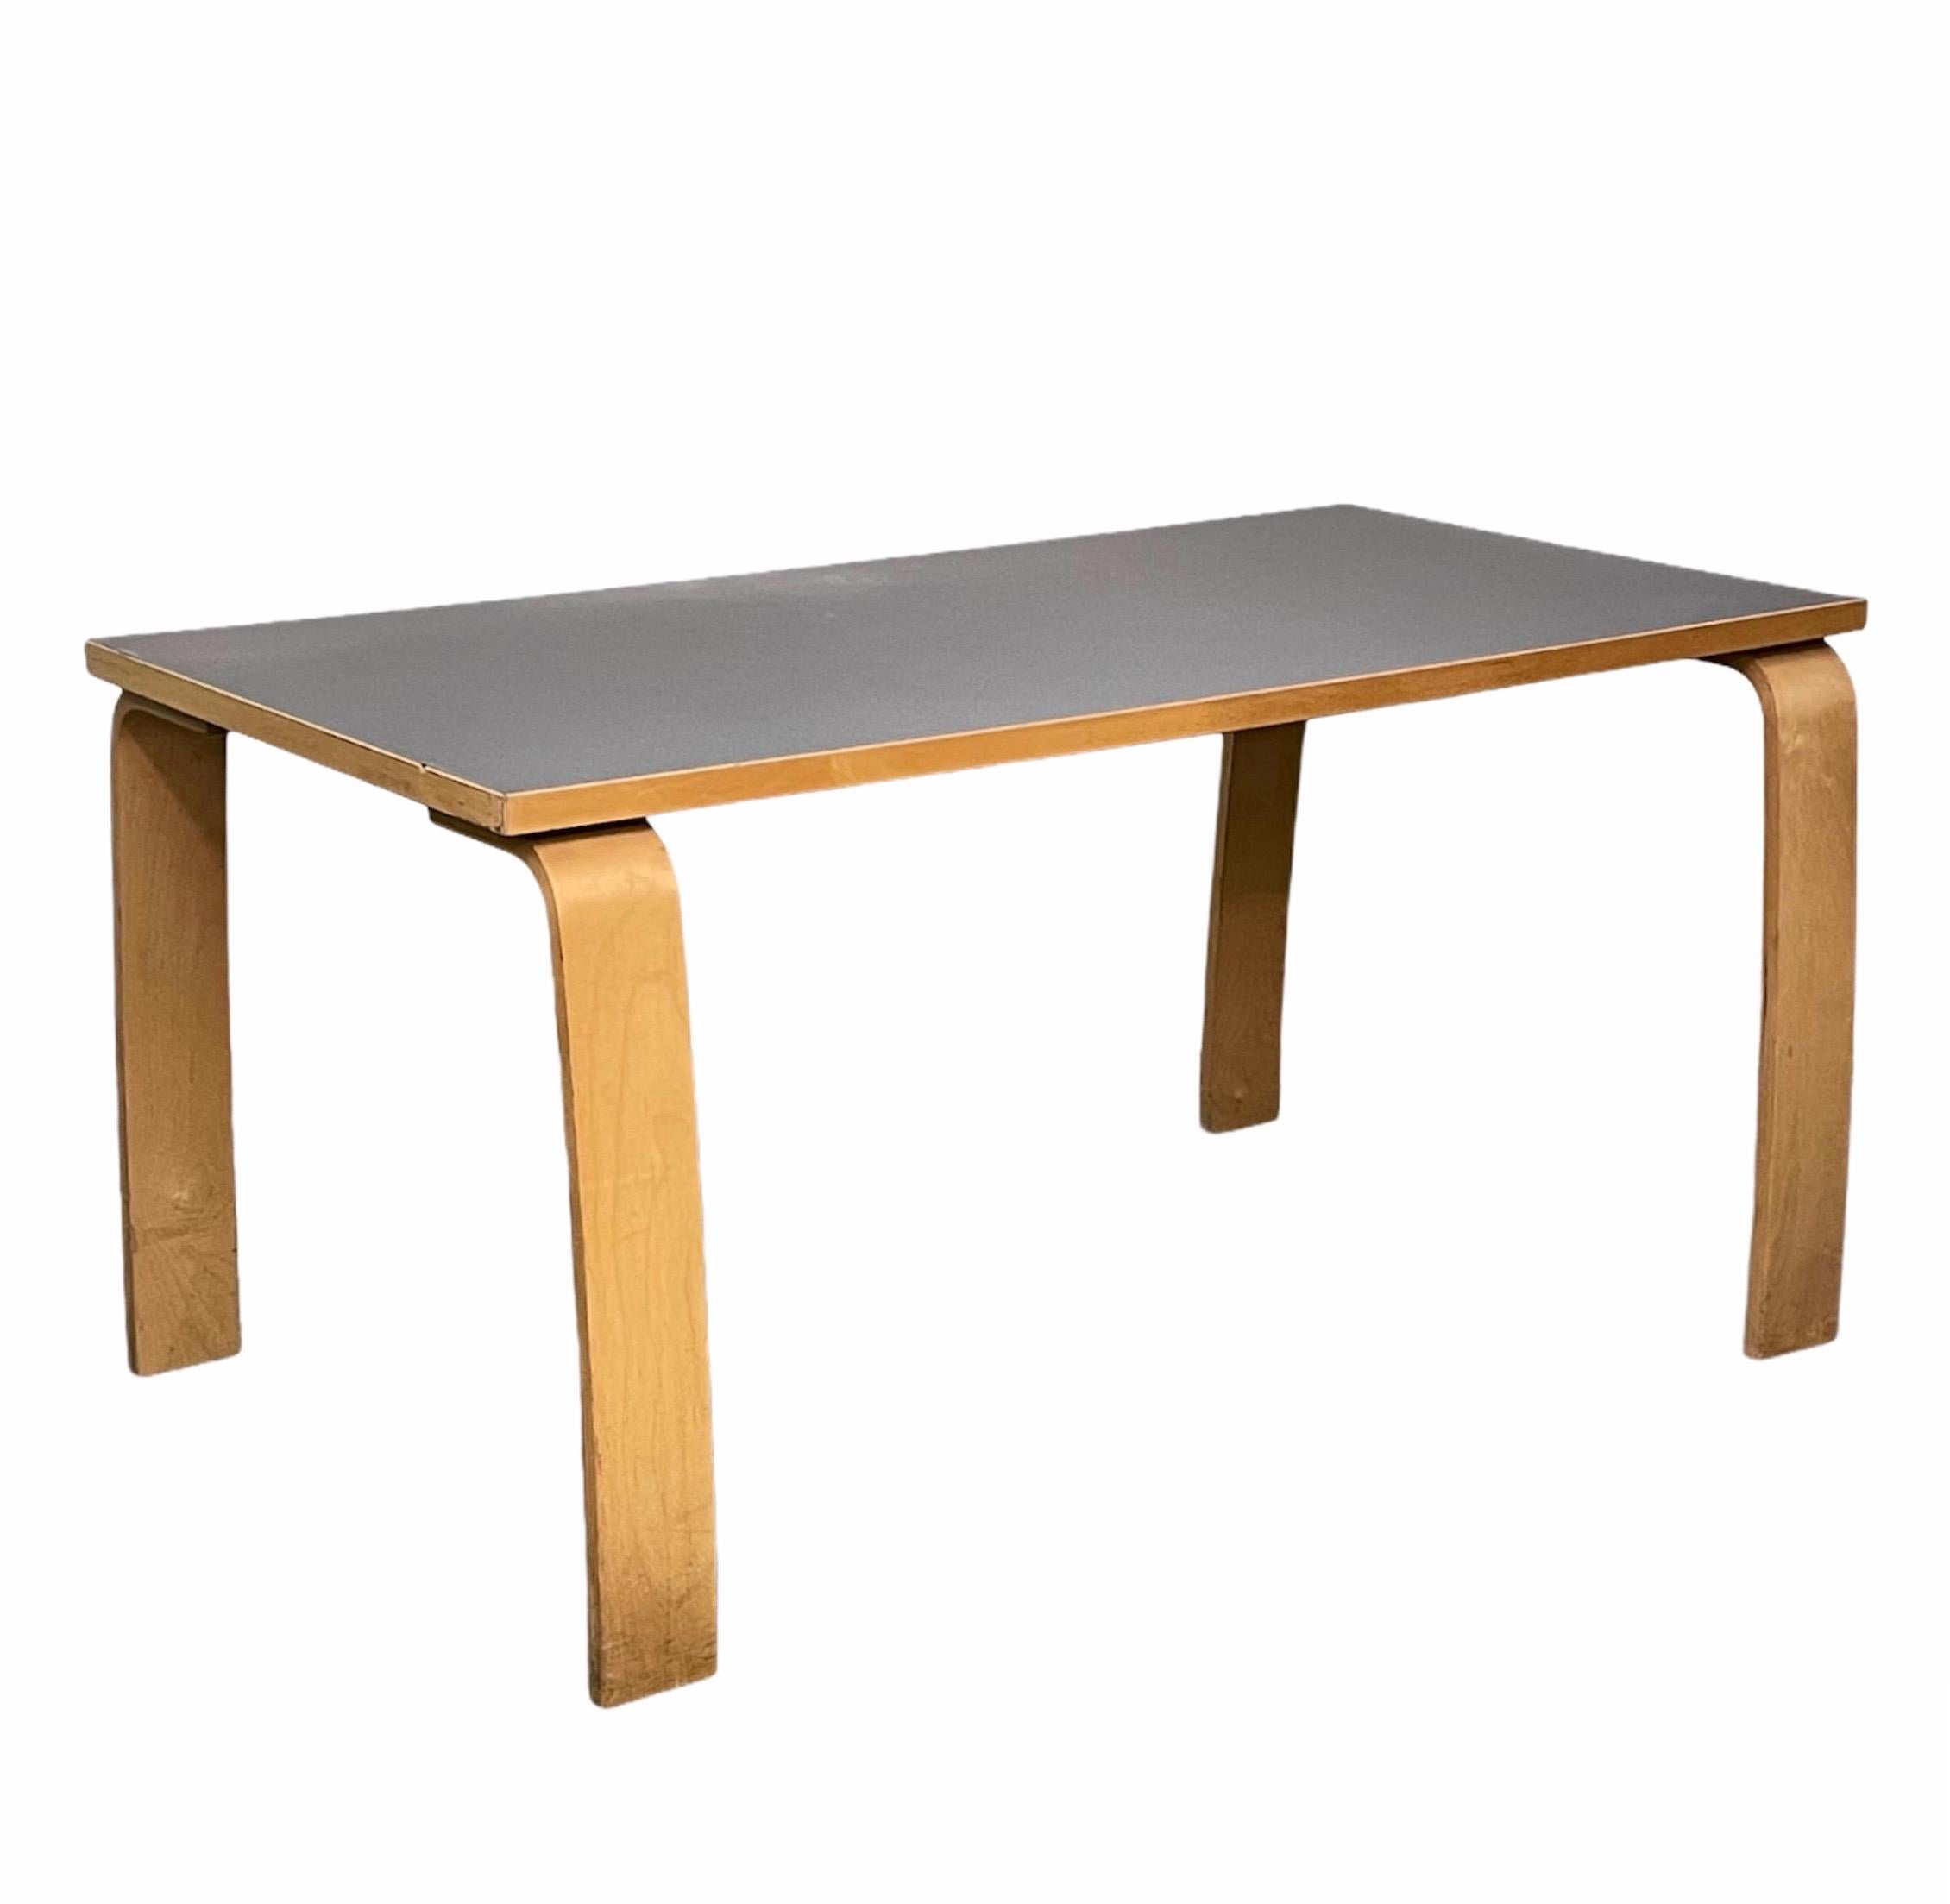 Wonderful midcentury wood dining table with grey formica top. This fantastic piece was designed in the style of Alvar Aalto in Italy during the 1980s.

You are going to love the clean lines, the straight grey Formica top and the way the legs are